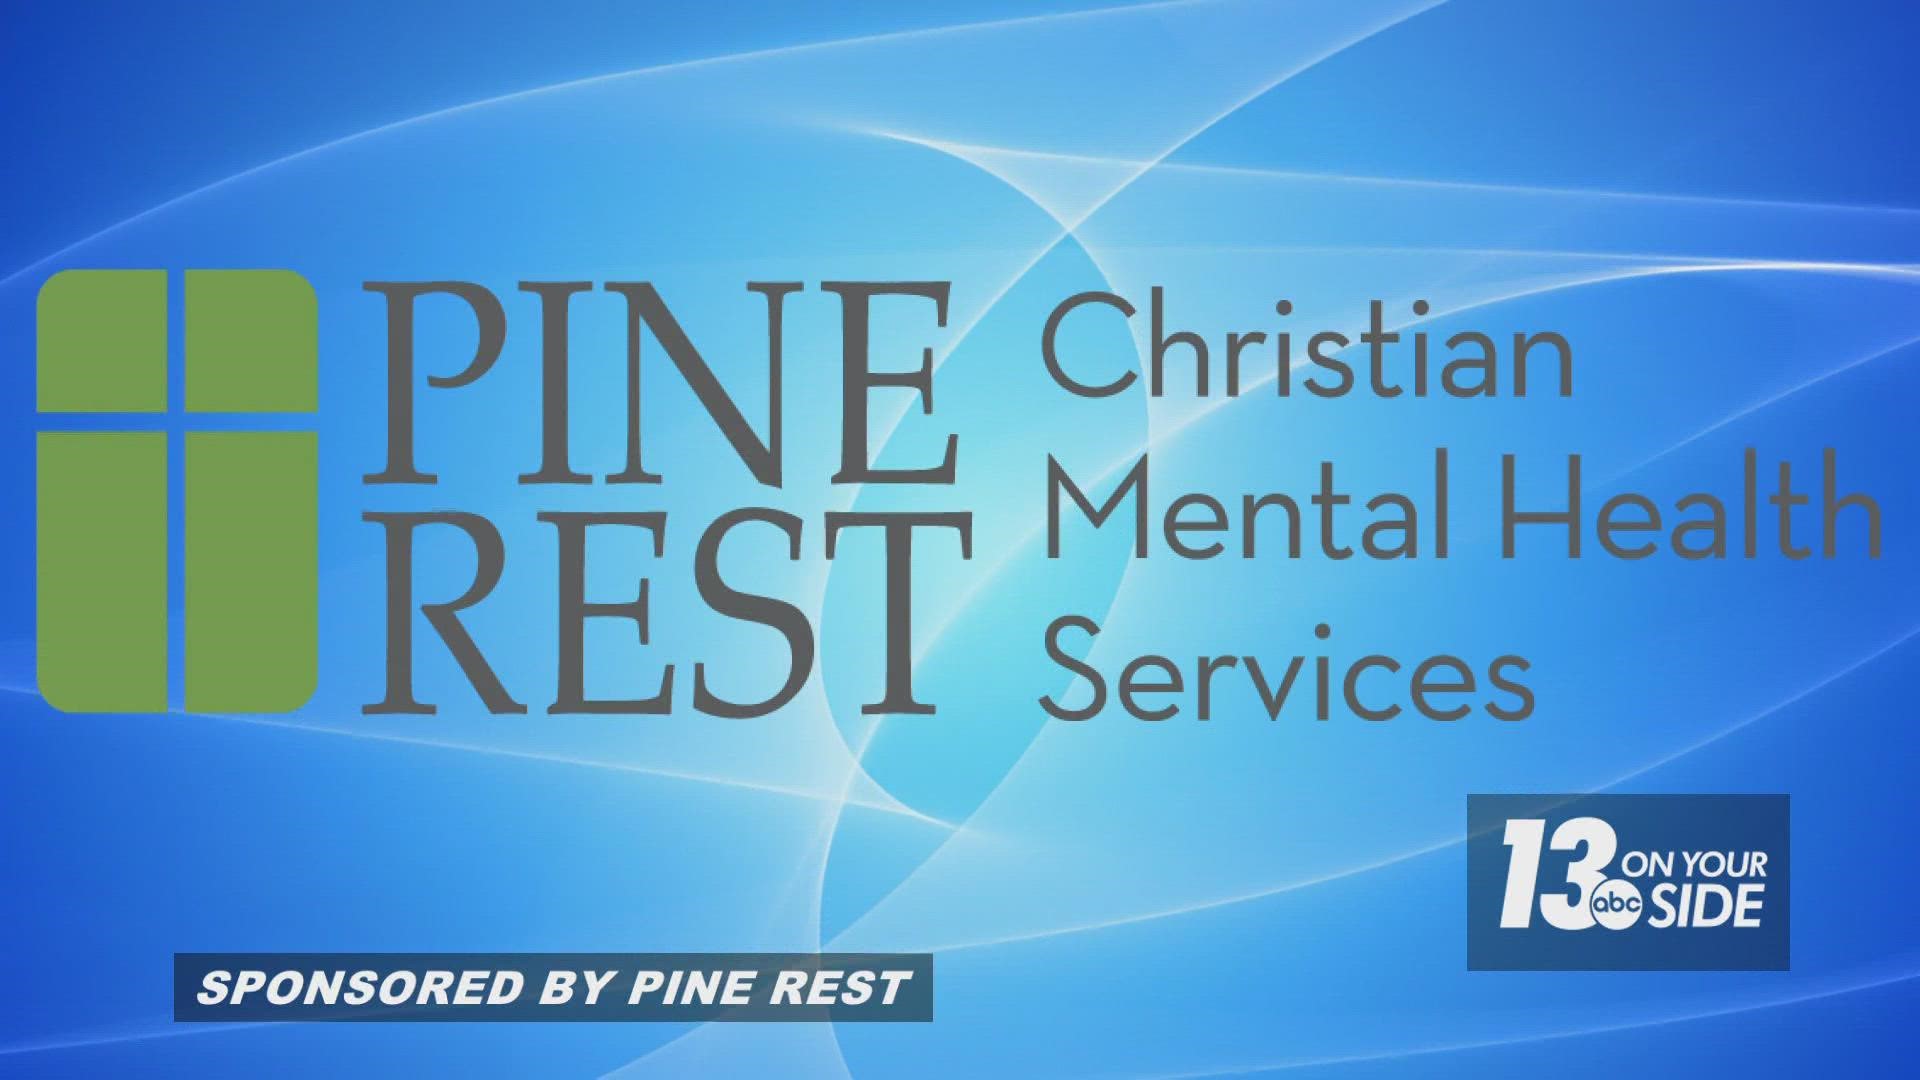 Mariah DeYoung is a social worker from Pine Rest Christian Mental Health Services. She said Pine Rest is definitely seeing an increased need for treatment.